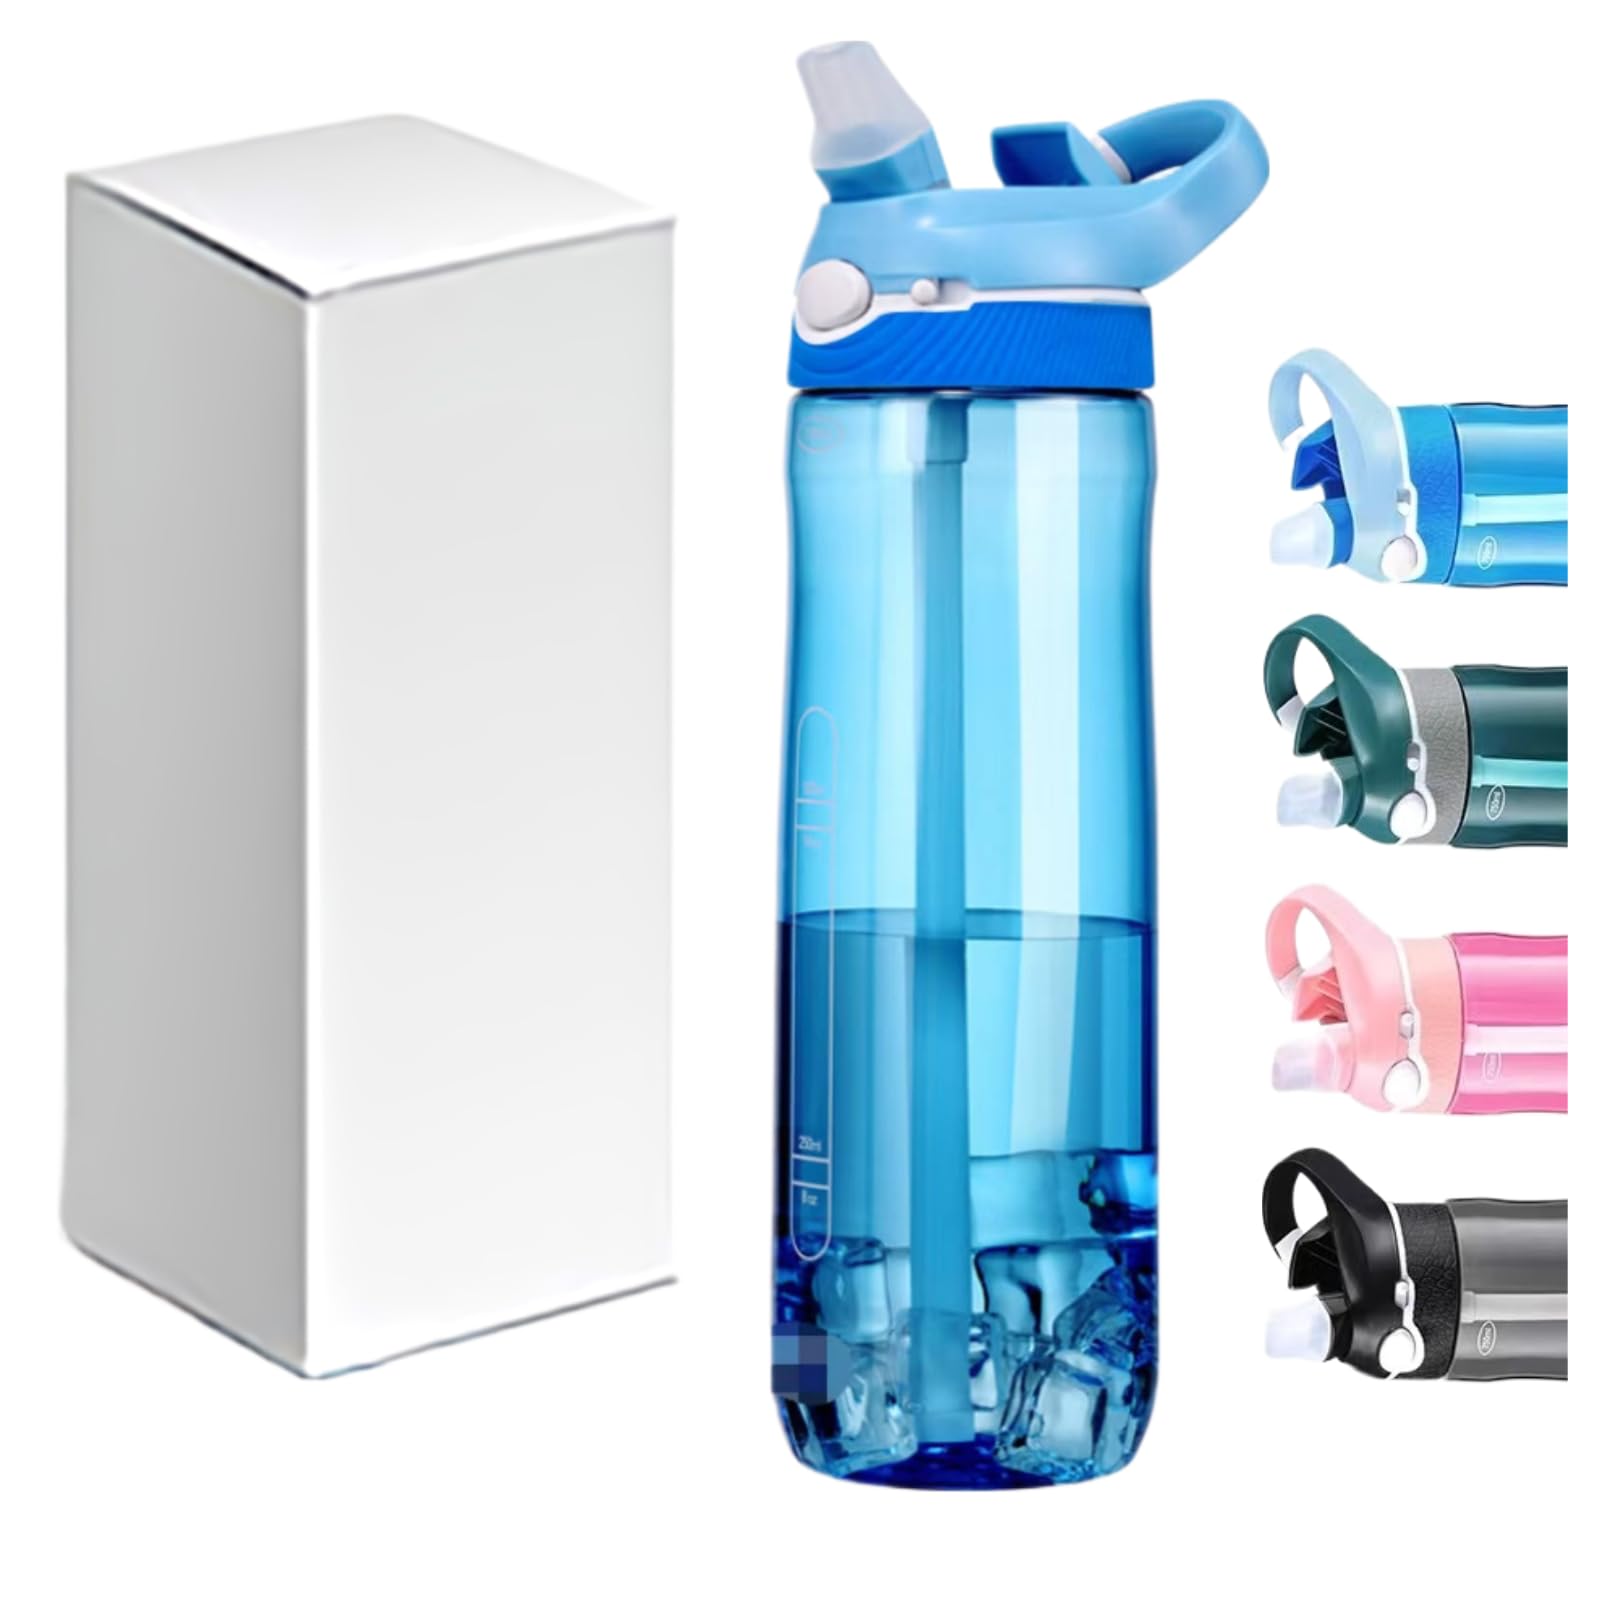 LBRG Water bottles with Locking Lid,Travel water bottle,Water bottle with straw,and Sports water bottle with Clip handle- Tritan water bottle(Blue)